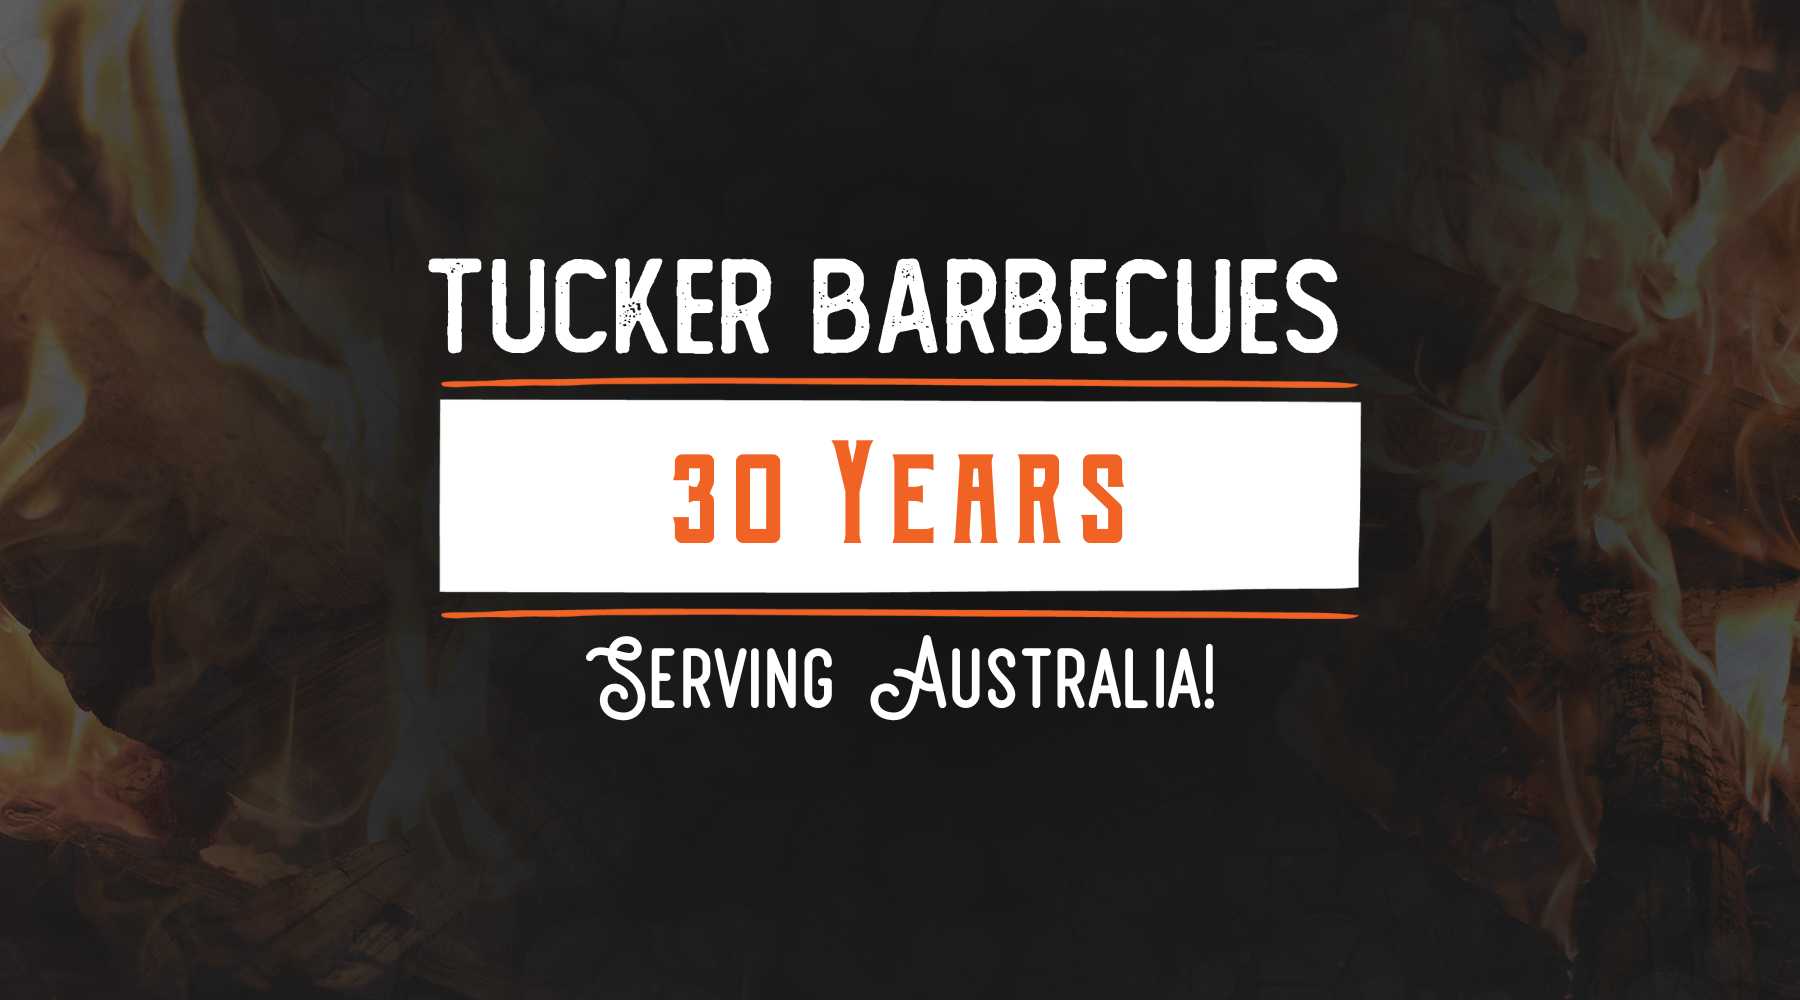 Tucker Barbecues: 30 Years of Serving Australia